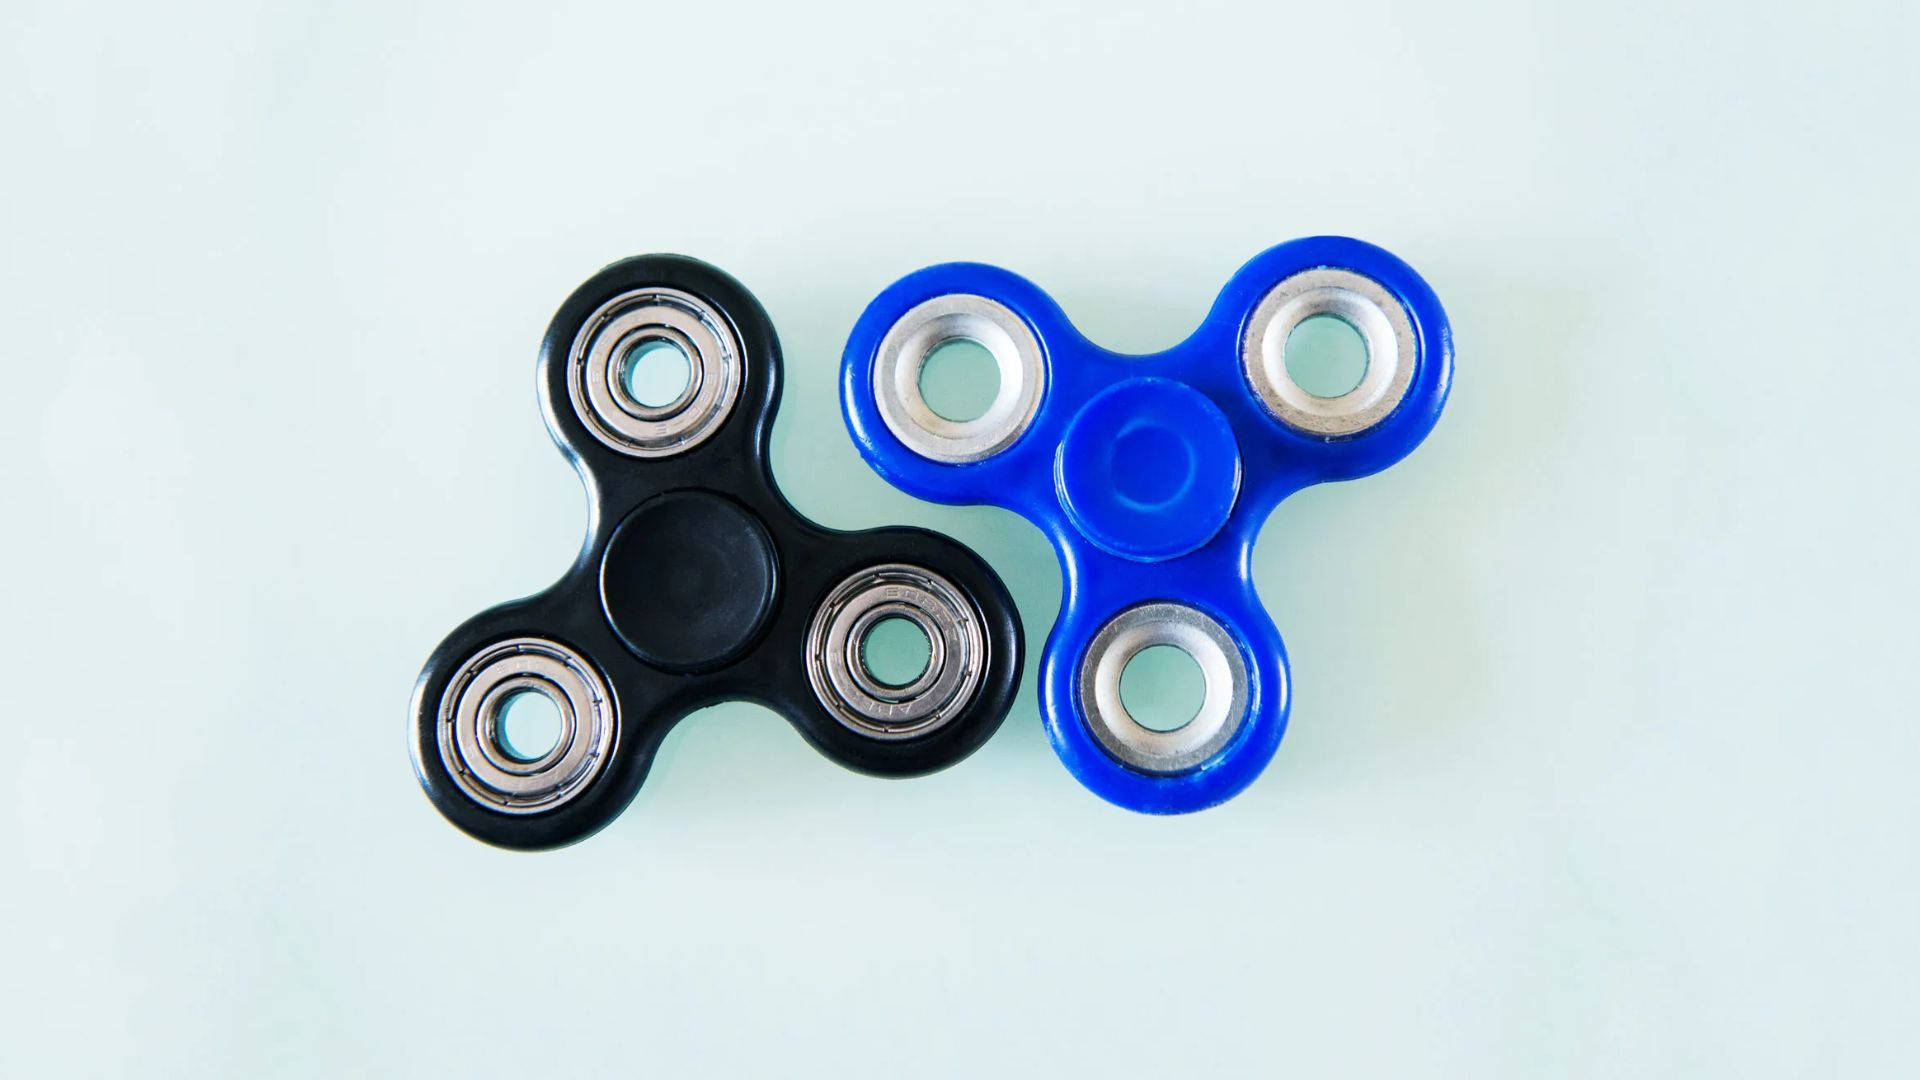 Soothing Design: Black And Blue Fidget Toys Background